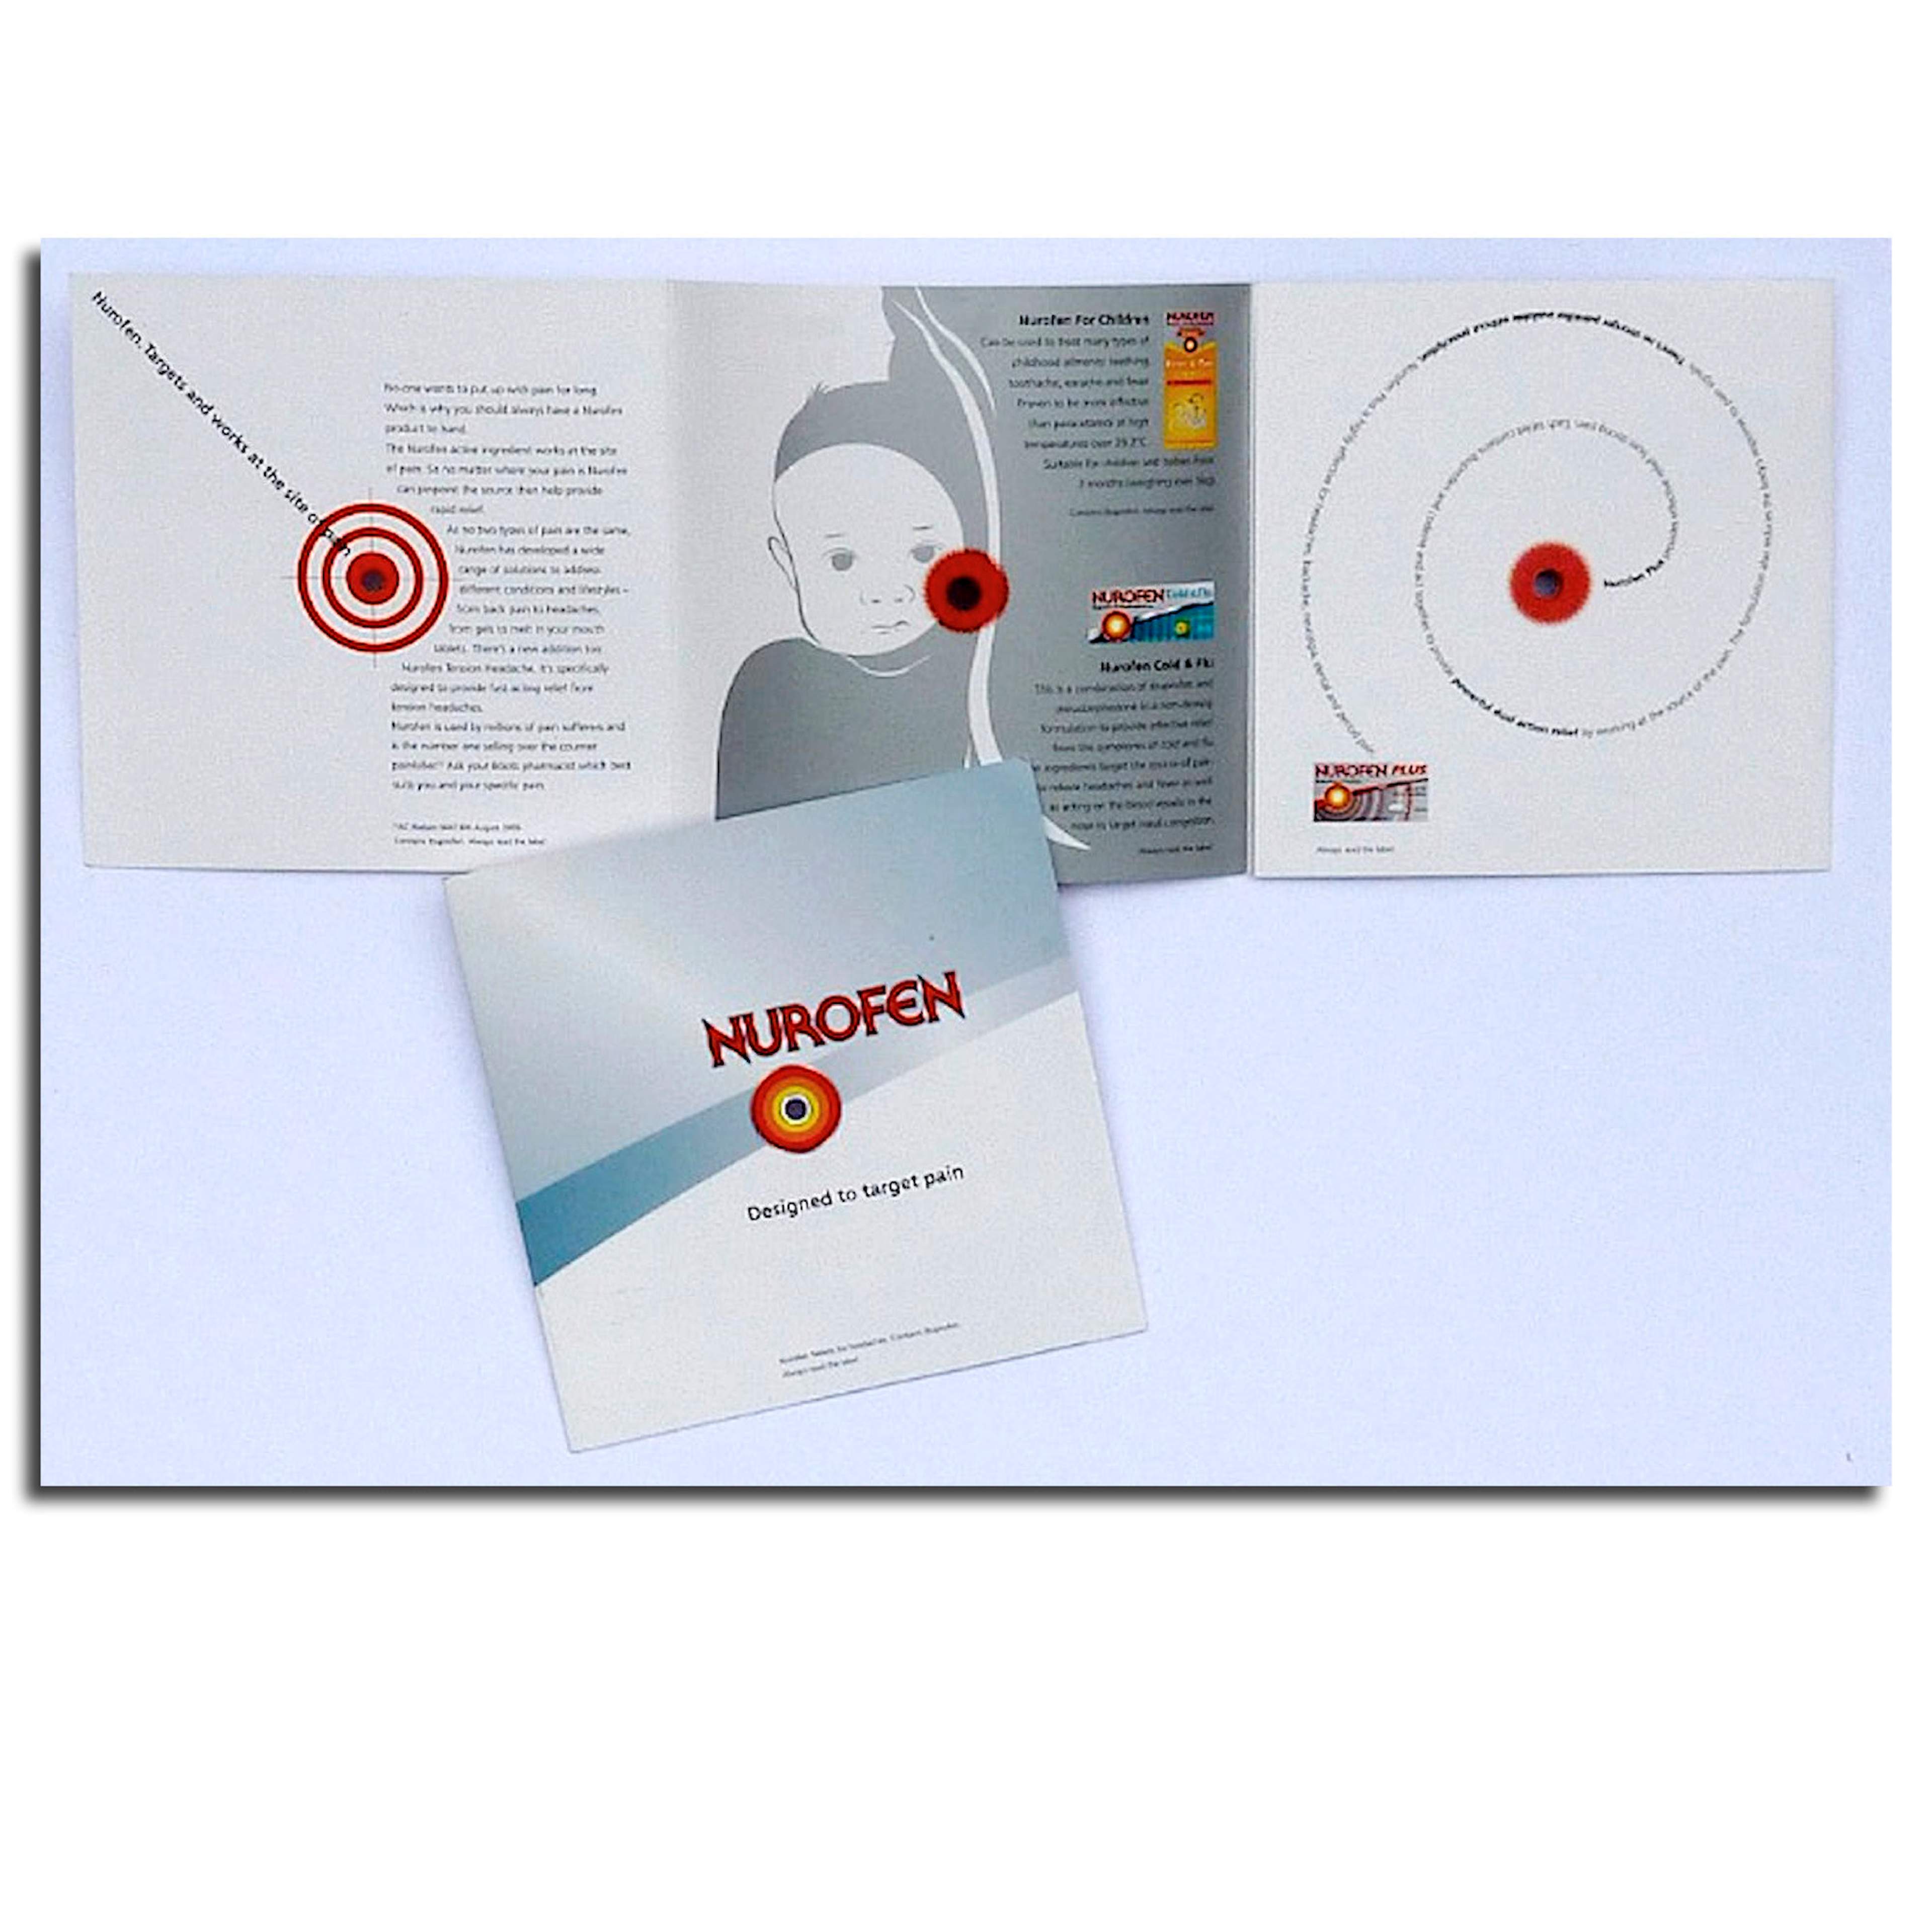 Nurofen direct mail piece showing how the range of Nurofen products target pain.